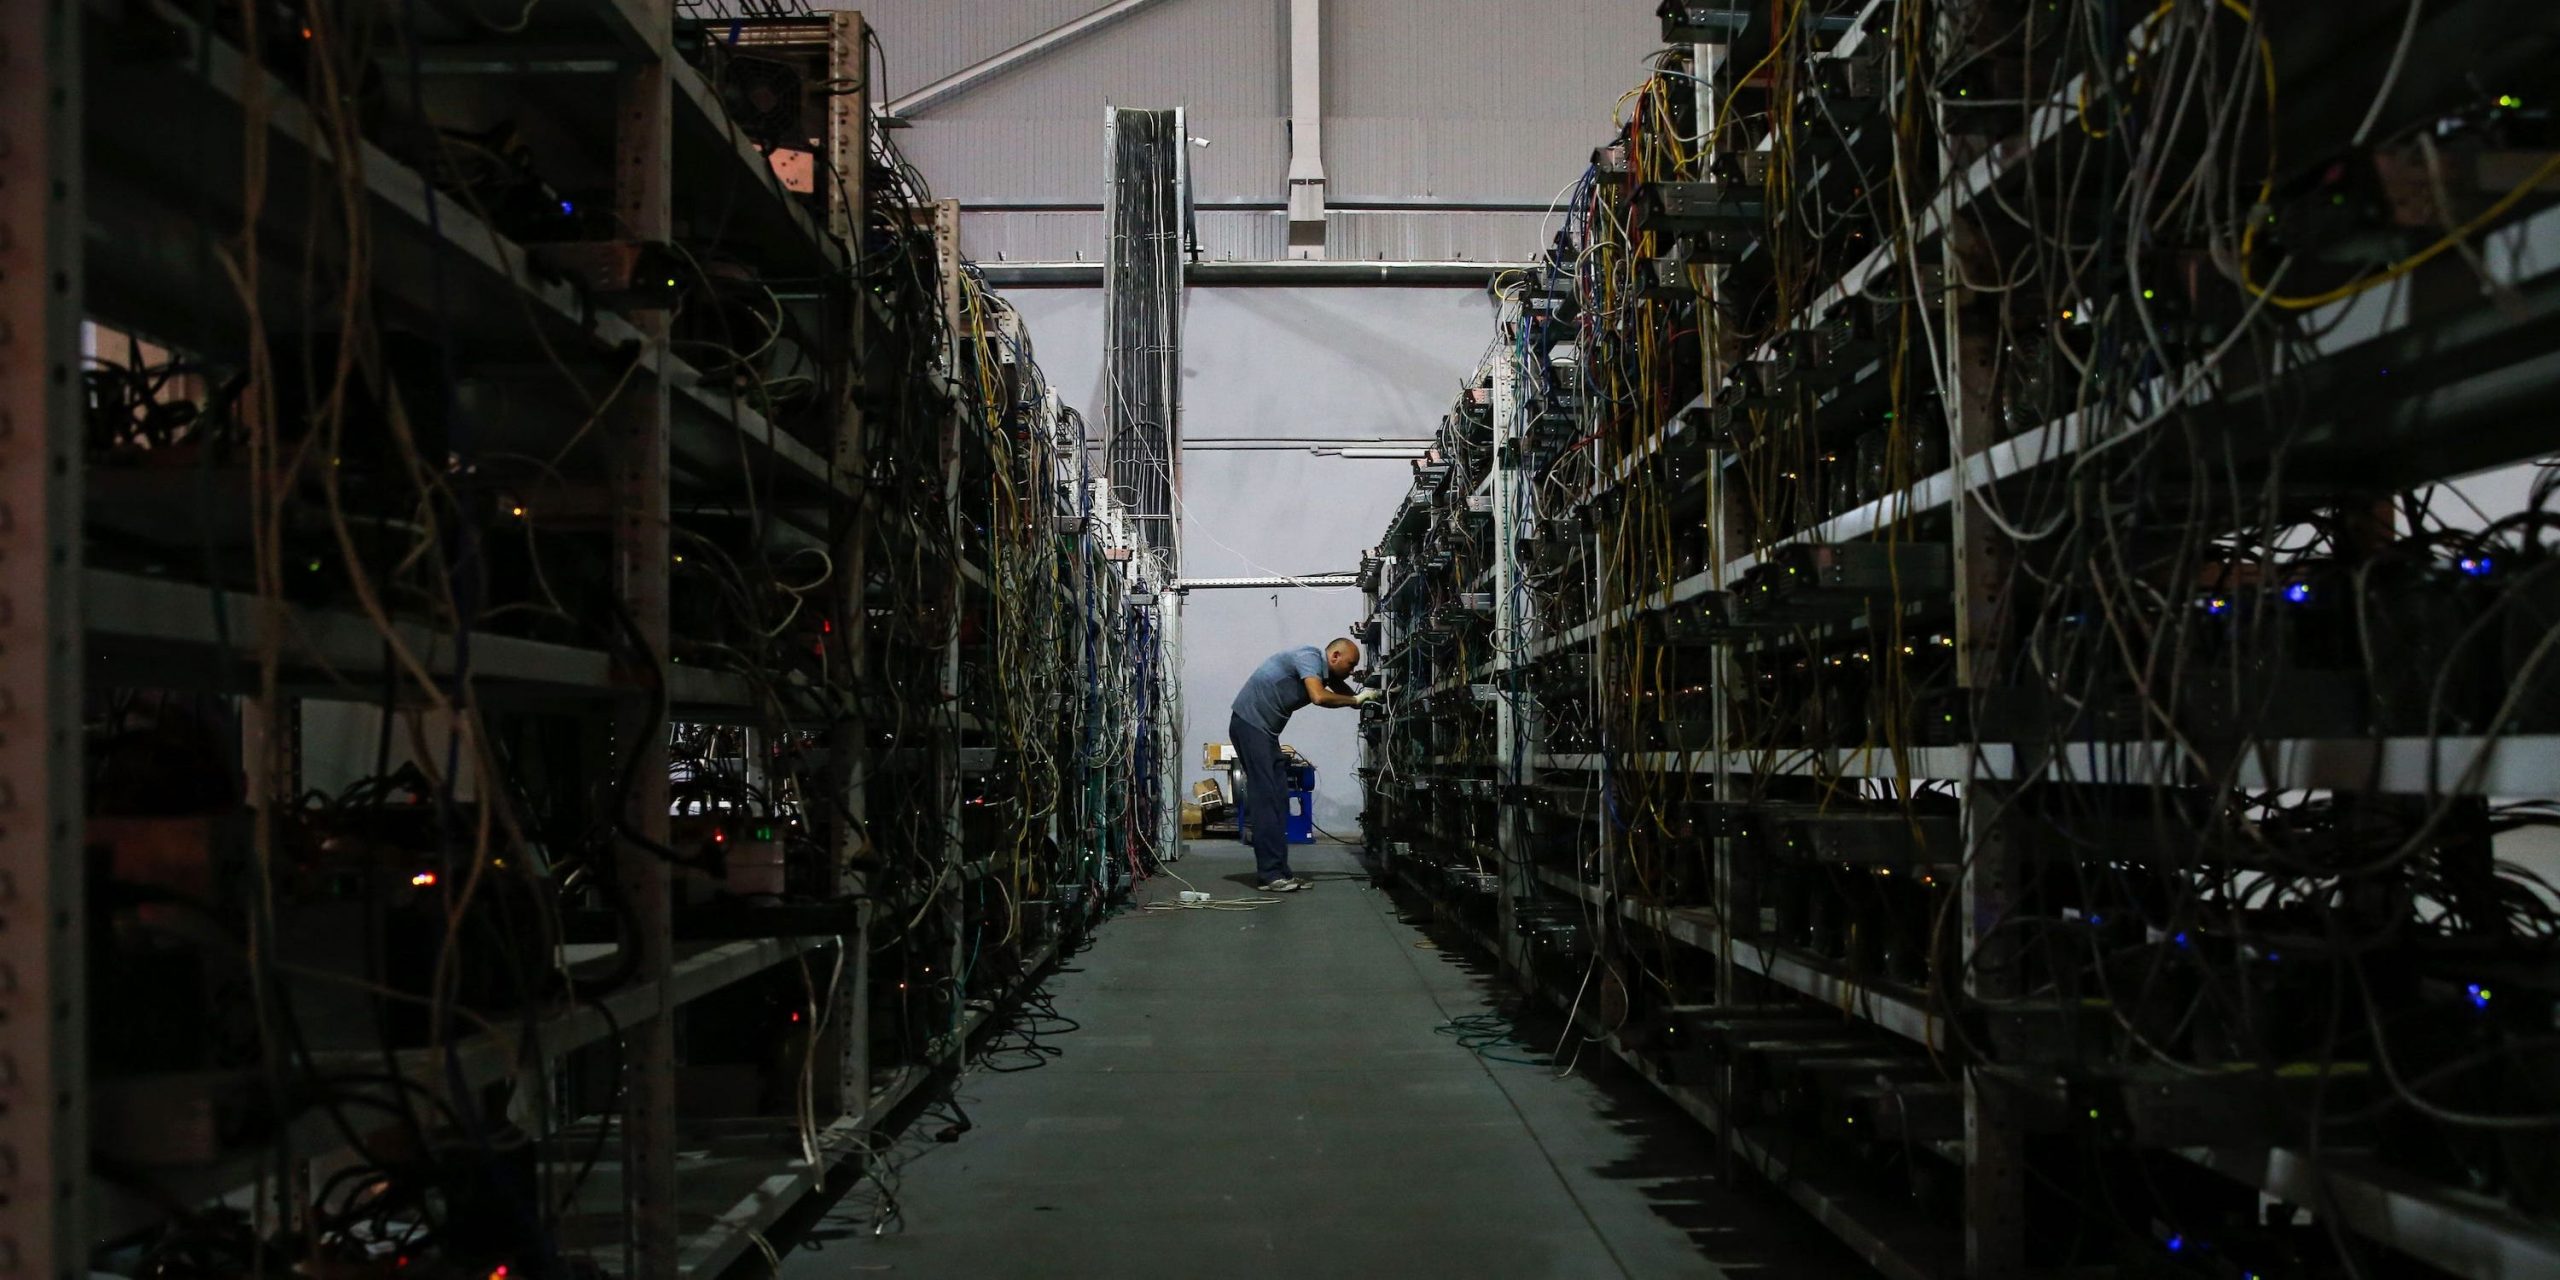 A man stands at the end of a long corridor. The walls are packed with computers and wires, which are being used to mine bitcoin.